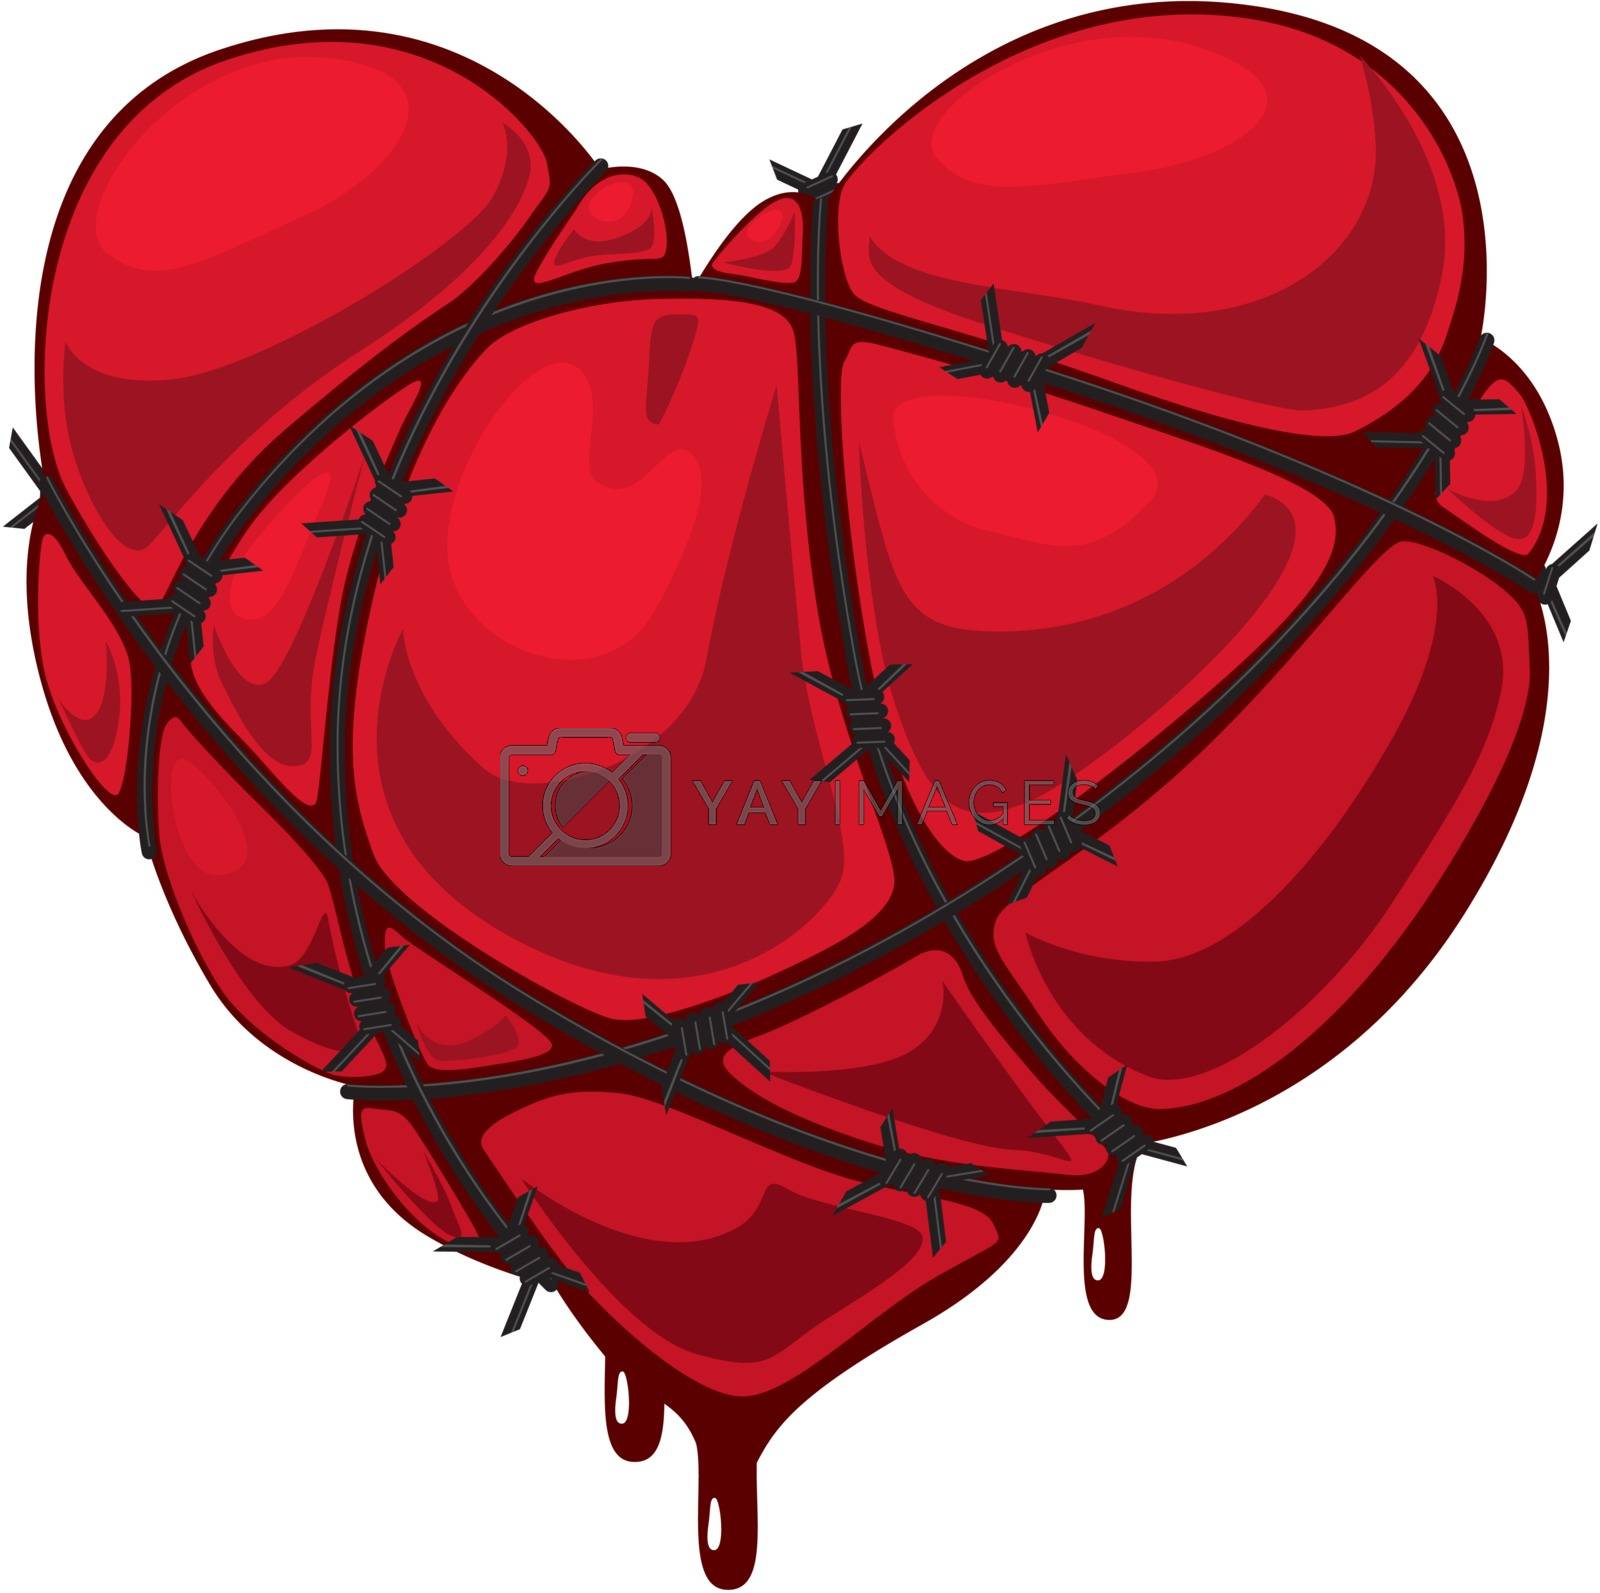 Royalty free image of Heart with barbed wire by polygraphus